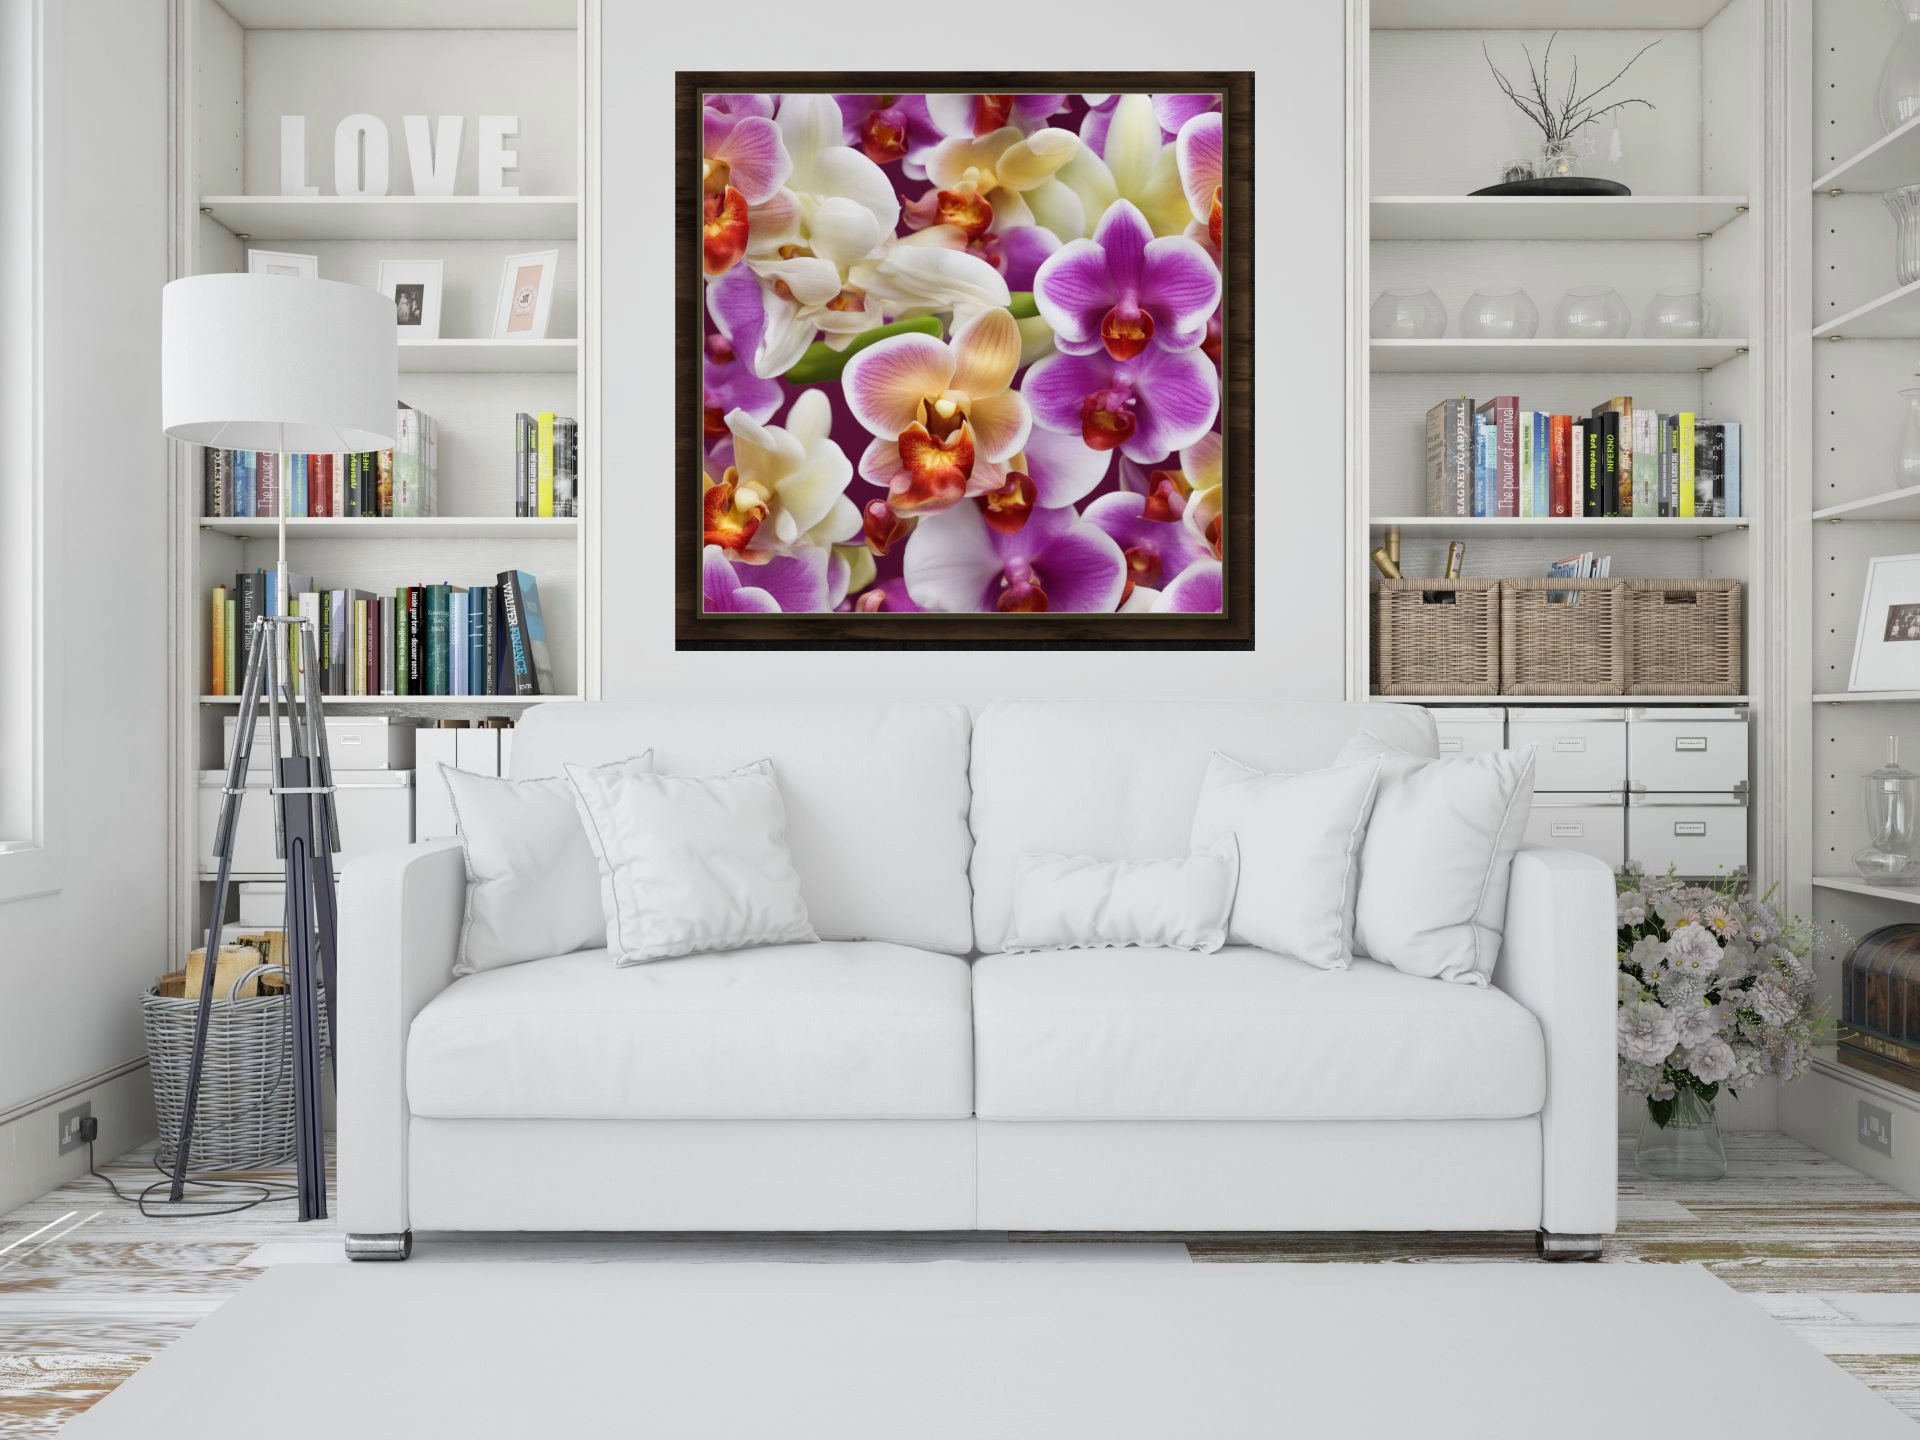 Wall Art ORCHIDS Canvas Print Art Deco Painting Original Giclee 32X32 + Frame Love Flower Minimalist Beauty Fun Design Fit House Office Gift Ready Hang